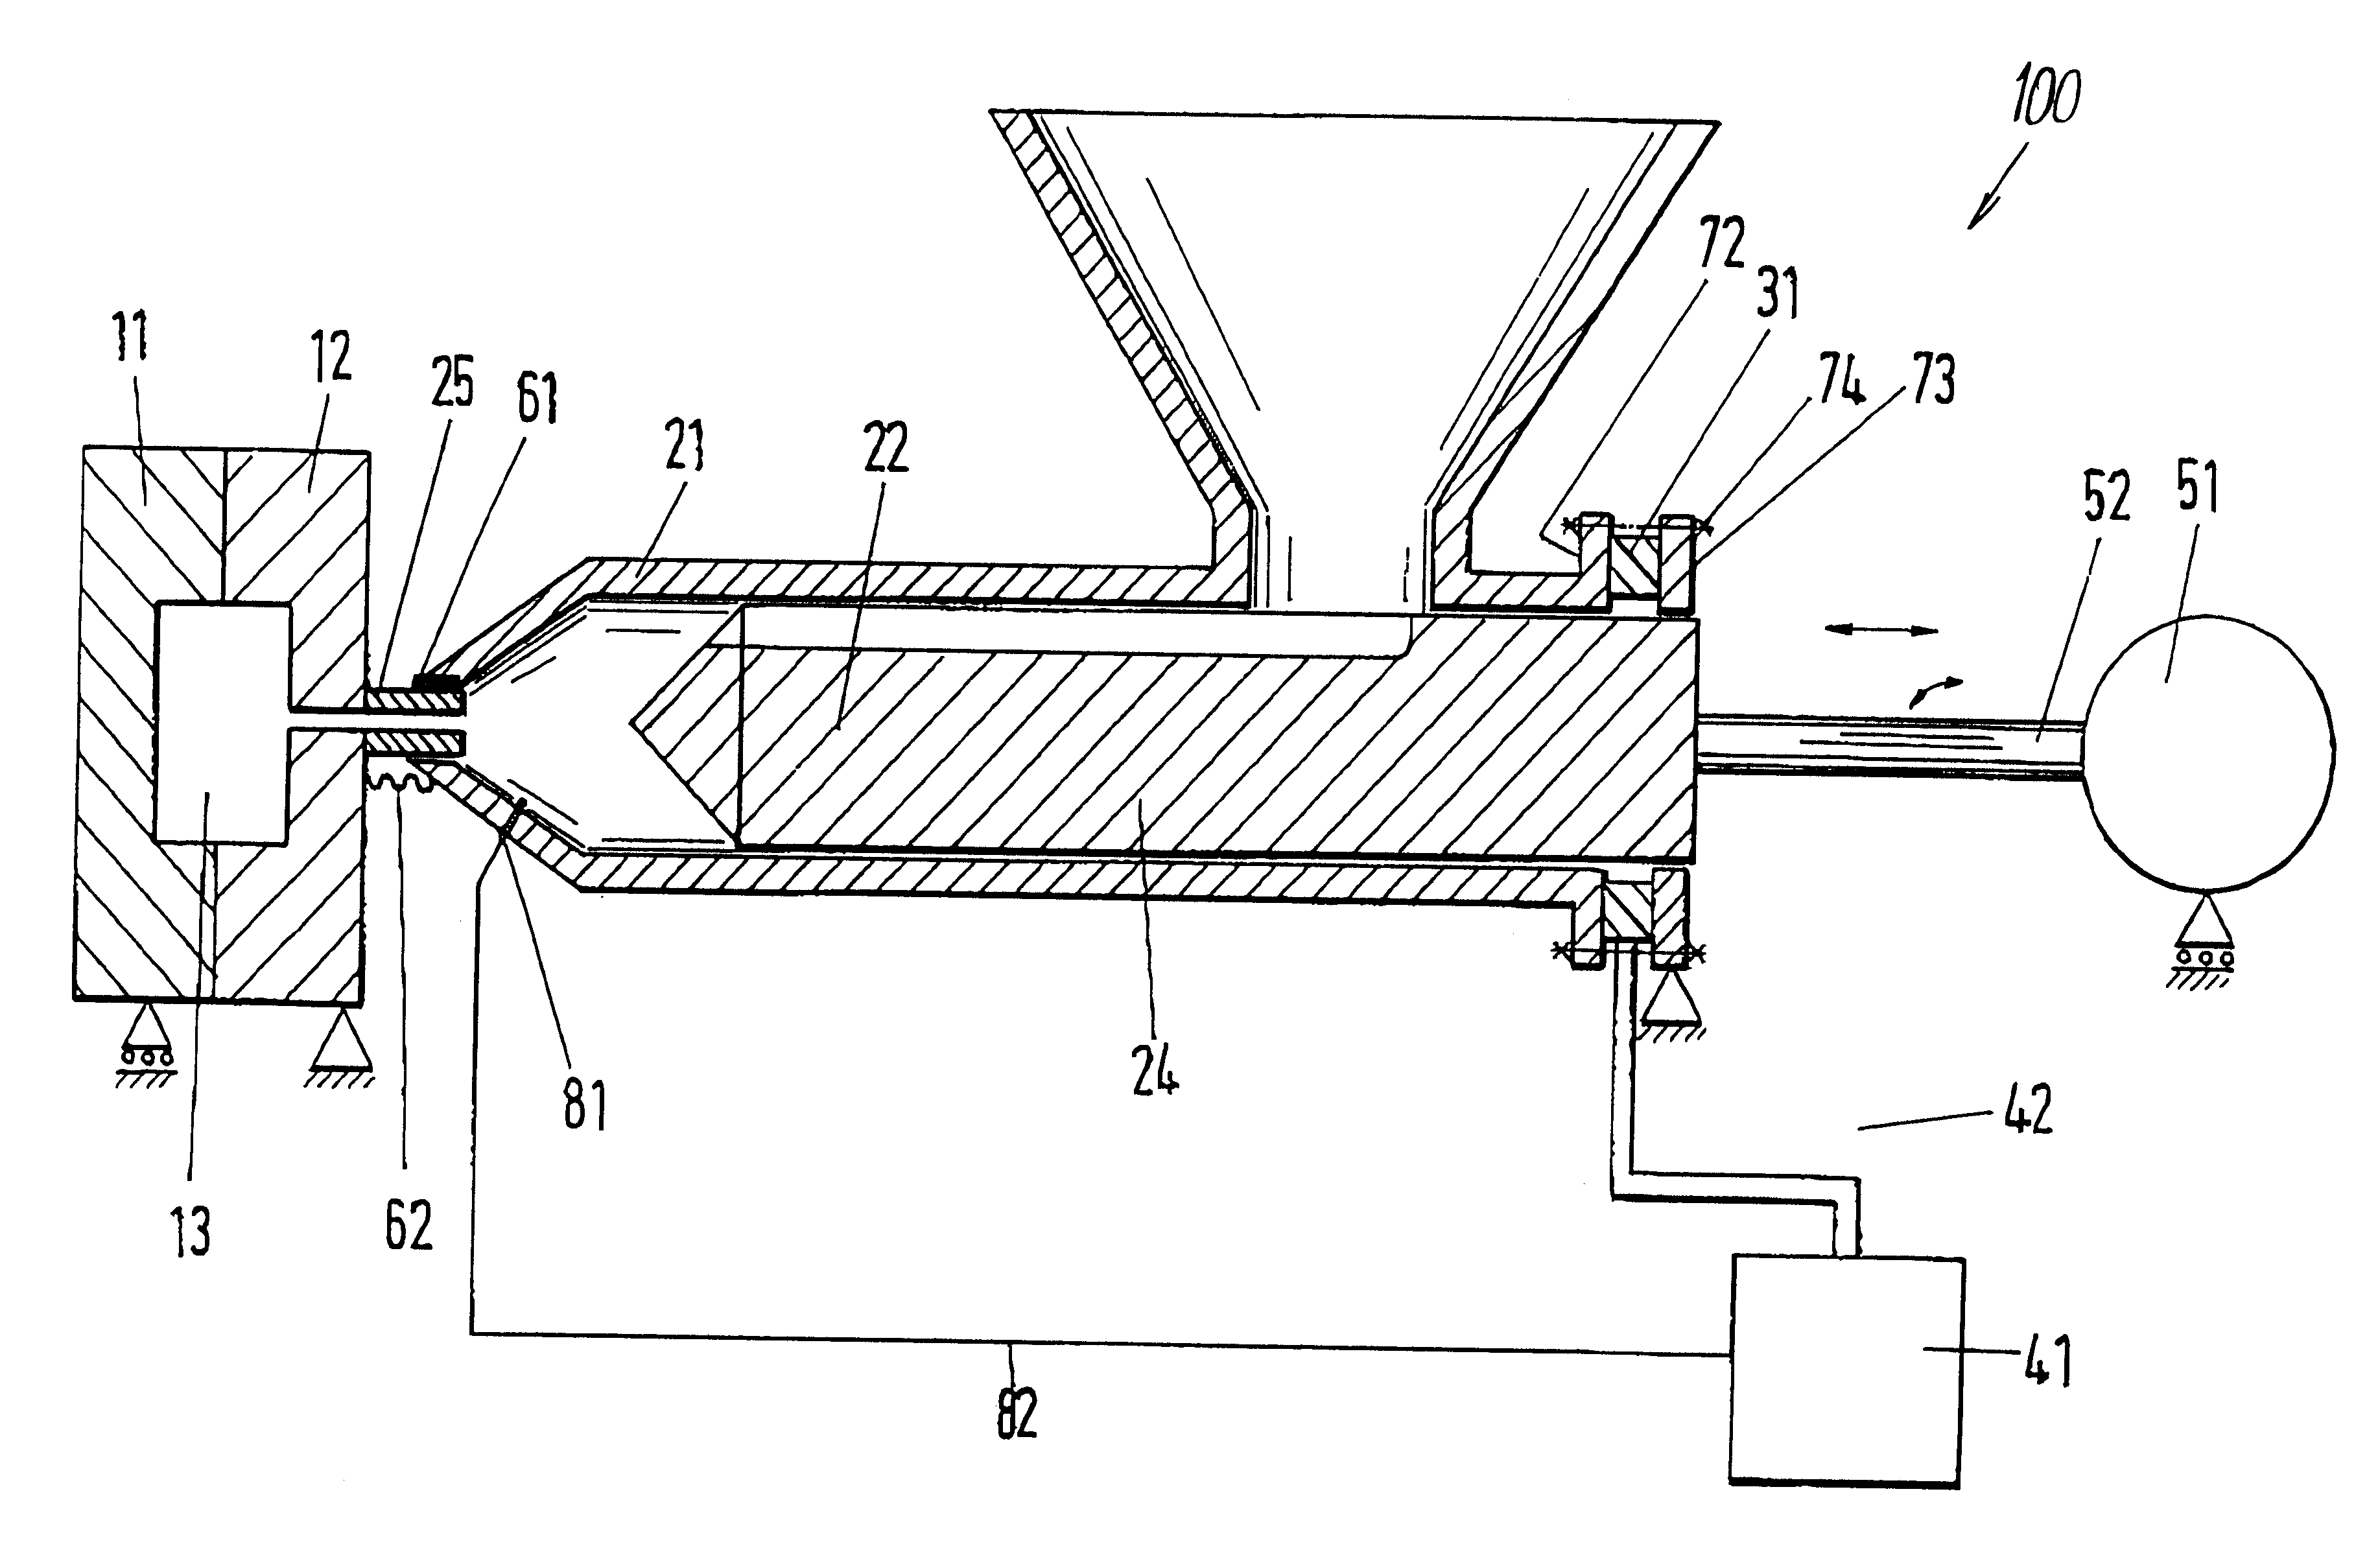 Resonating injection molding machine and process for its operation